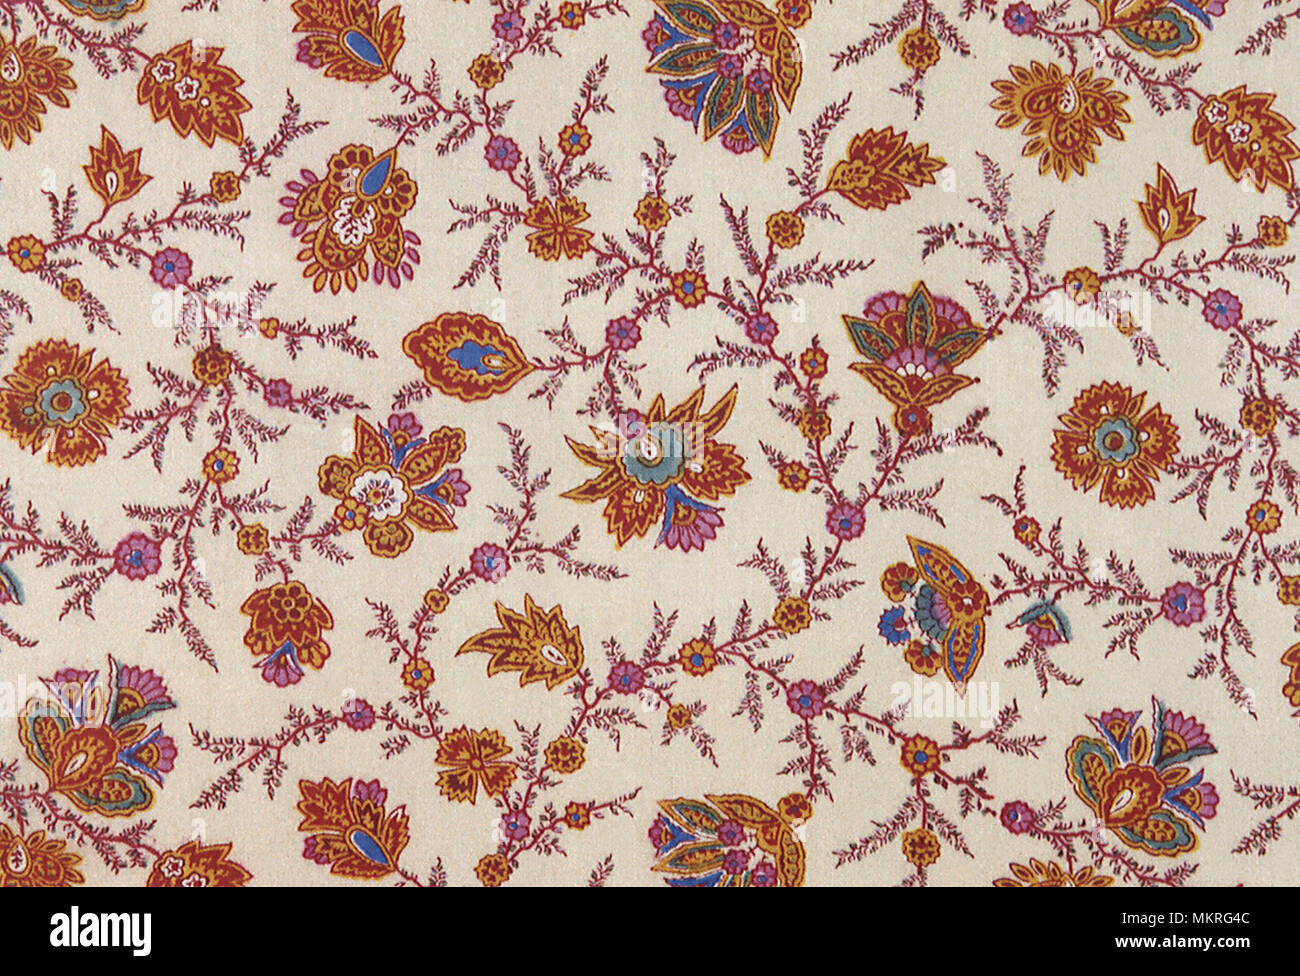 Paisley influenced floral pattern repeat on off white field Stock Photo